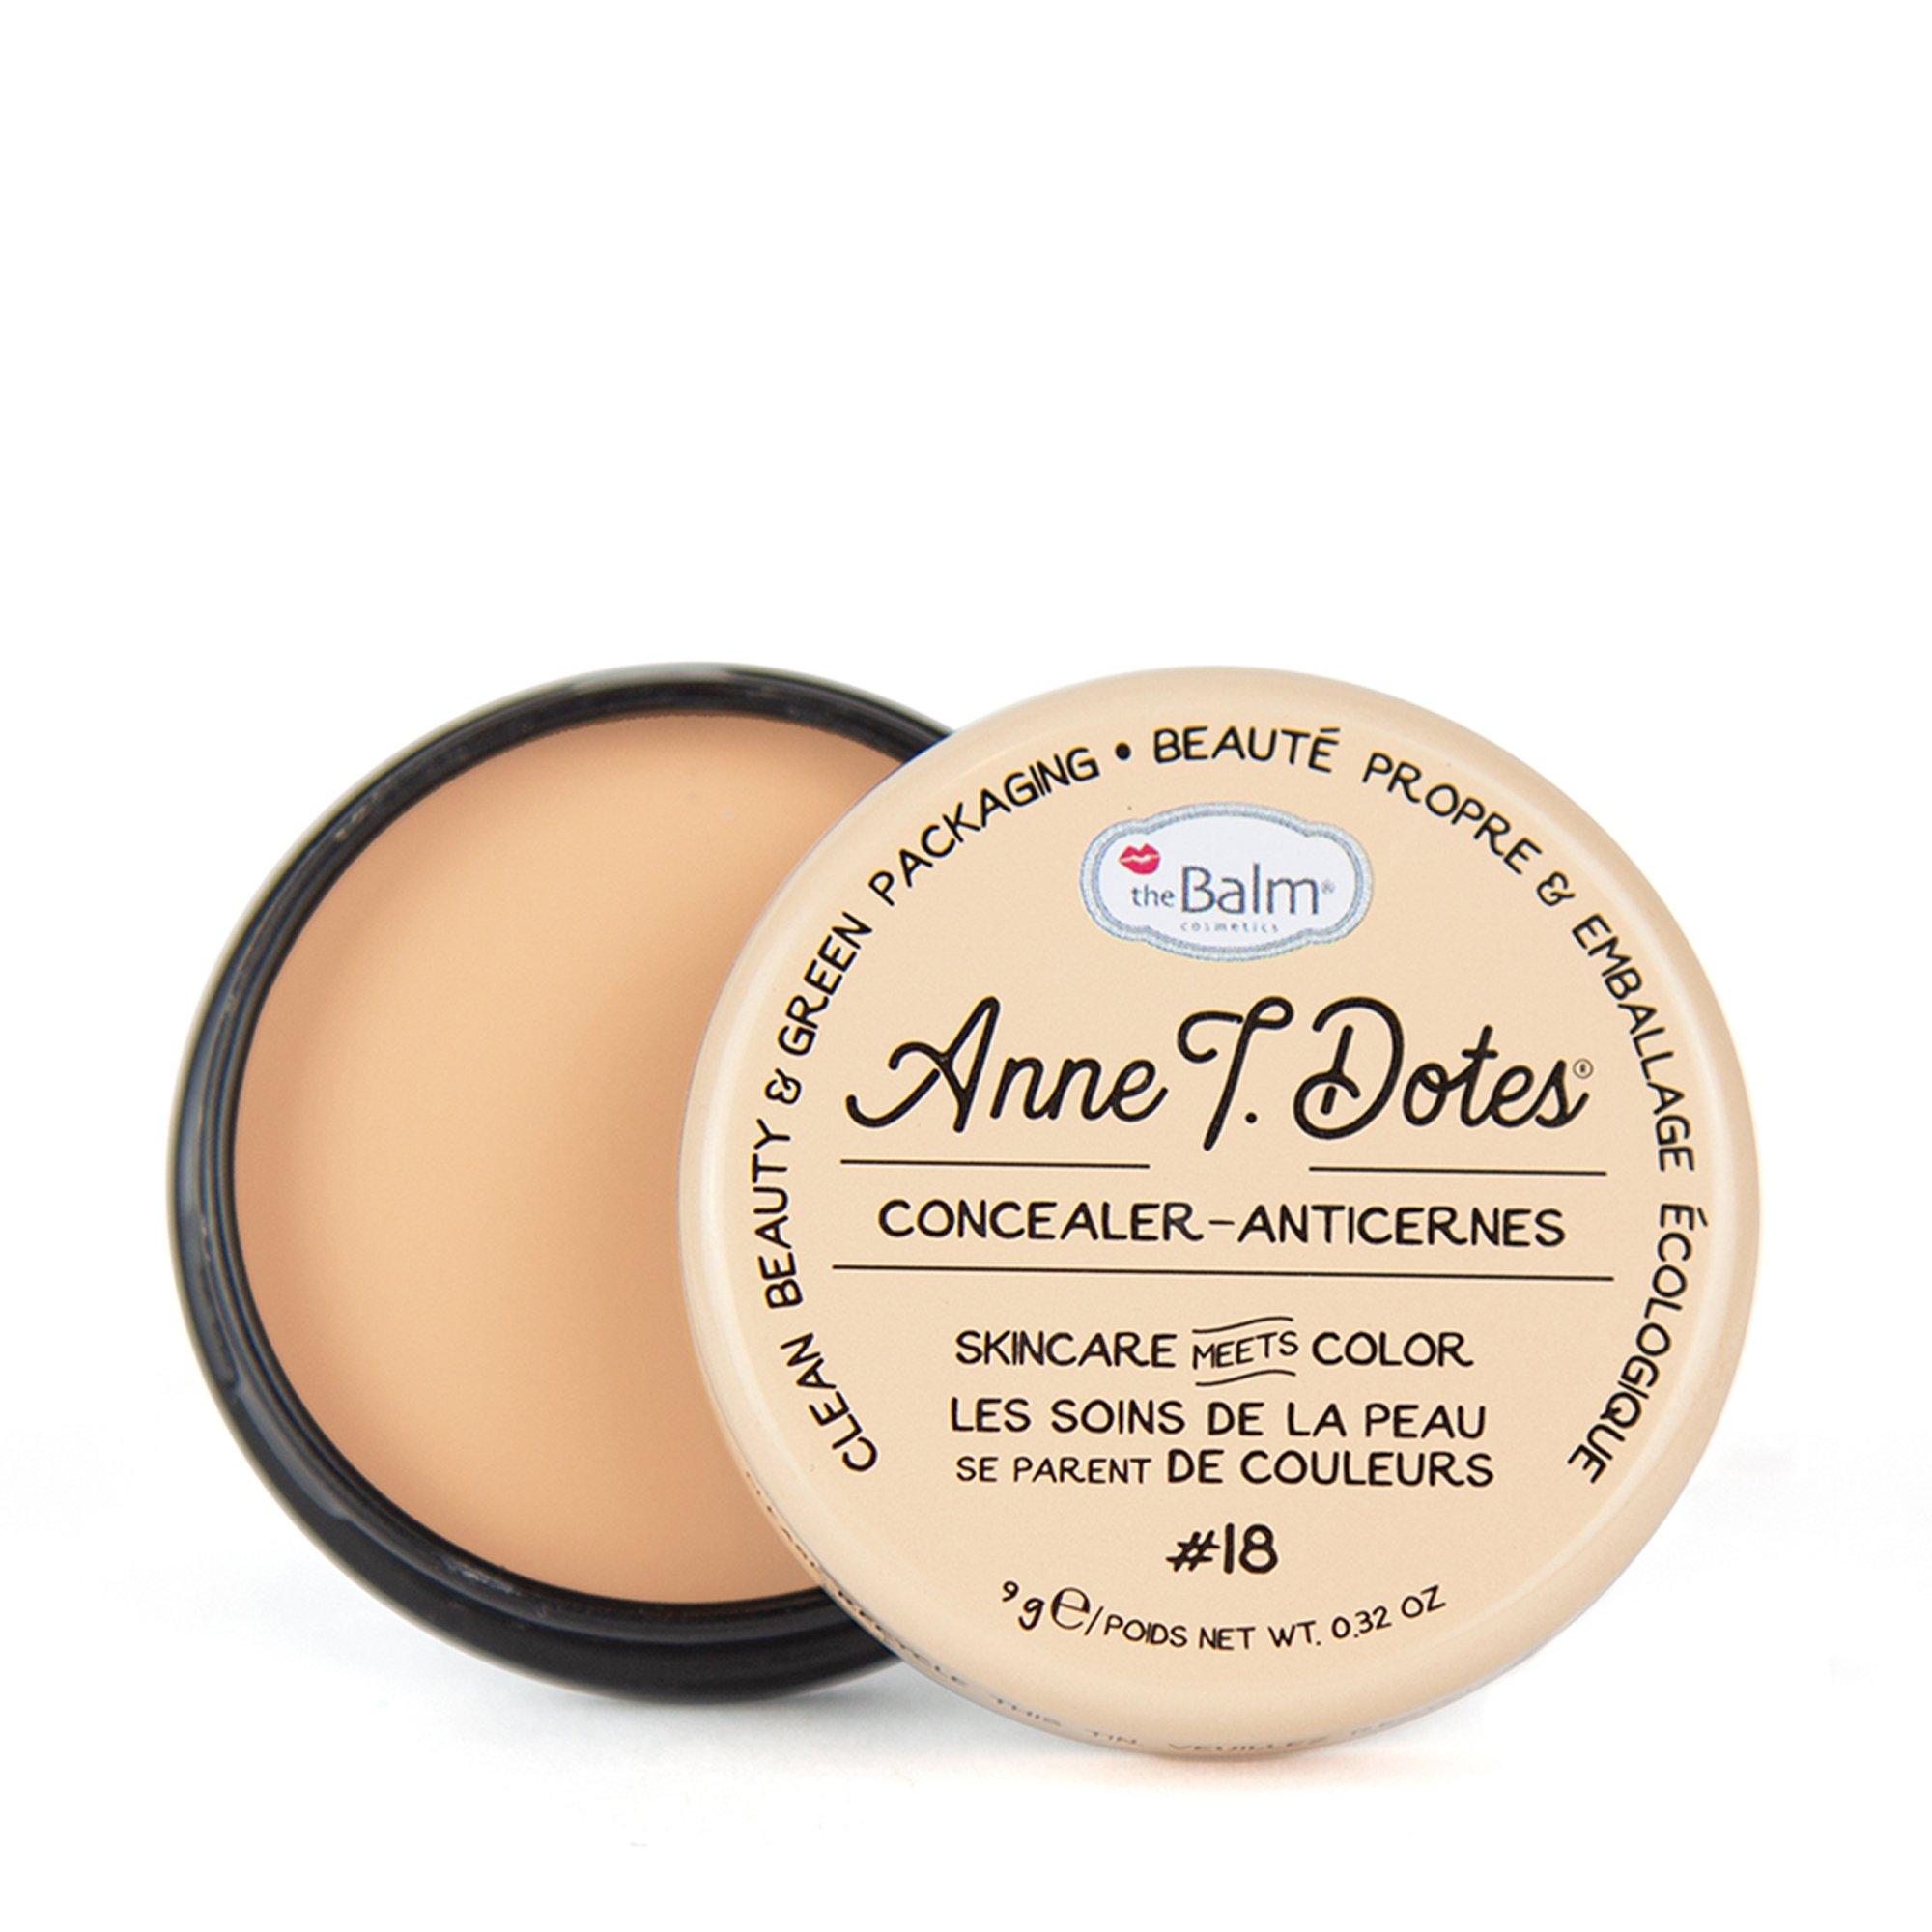 Image of THE BALM Anne T. Dote Concealer